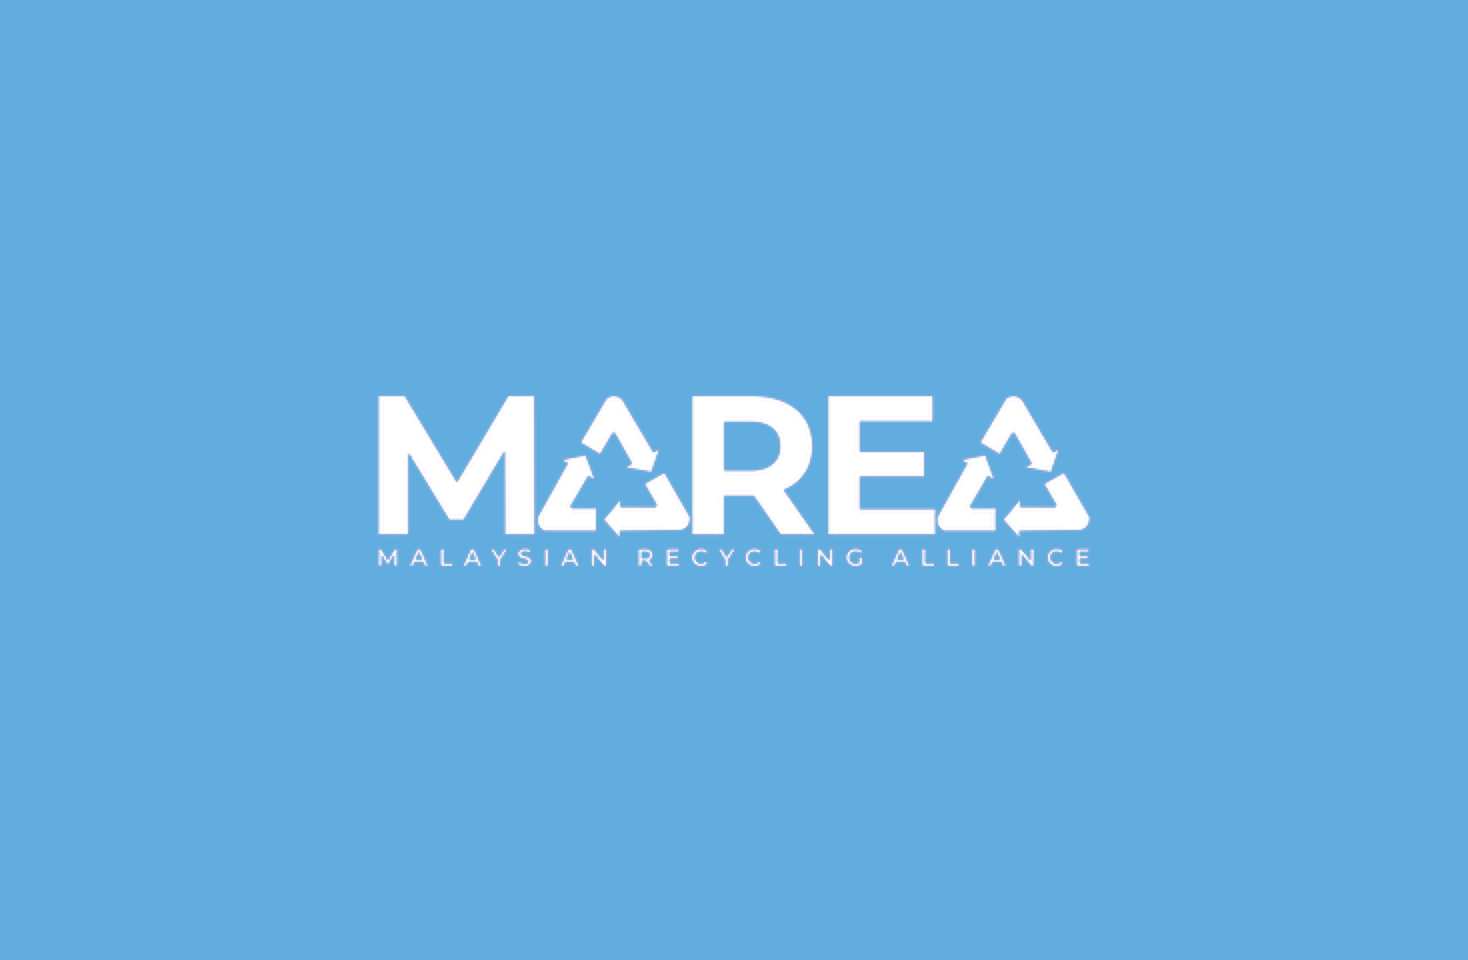 Image of MCC joins MAREA, the Malaysian Recycling Alliance, as an associate contributor